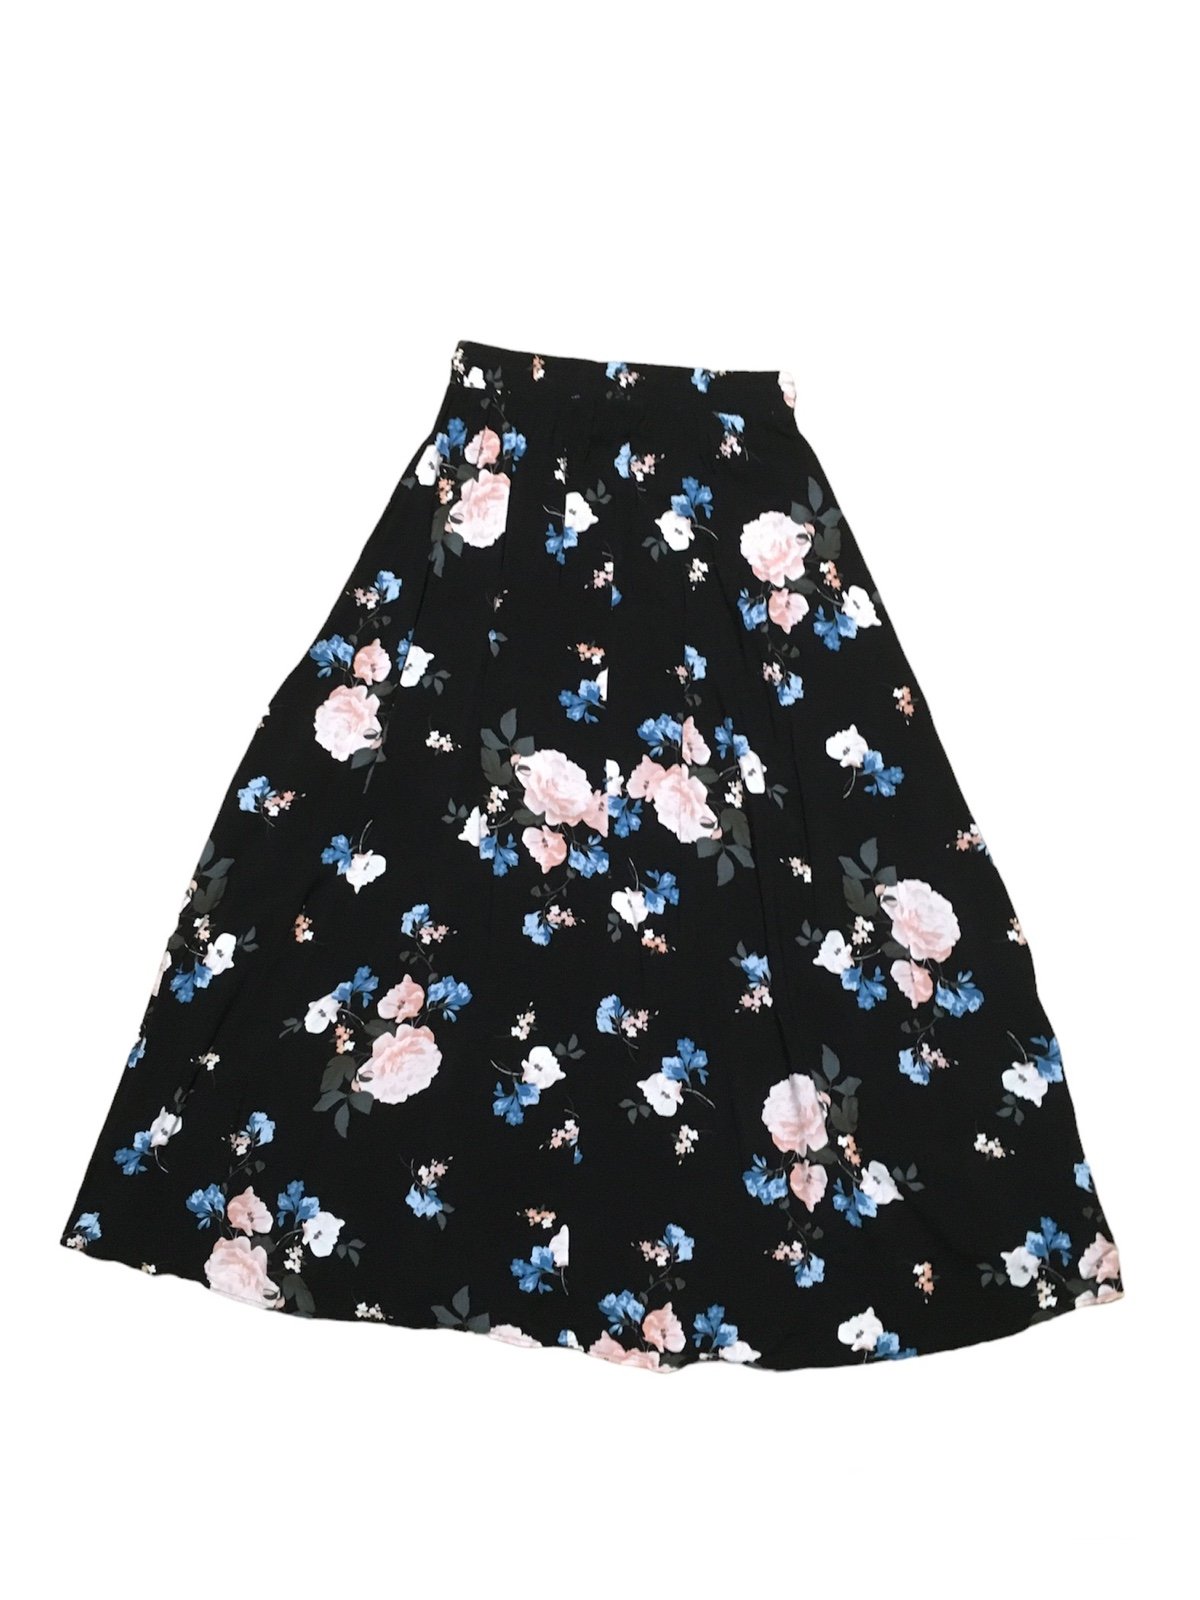 The Best Seller Torrid Maxi Challis Skirt Floral Black Front Slits Stretchy Waist Casual mIEgJF7Ia Cheap